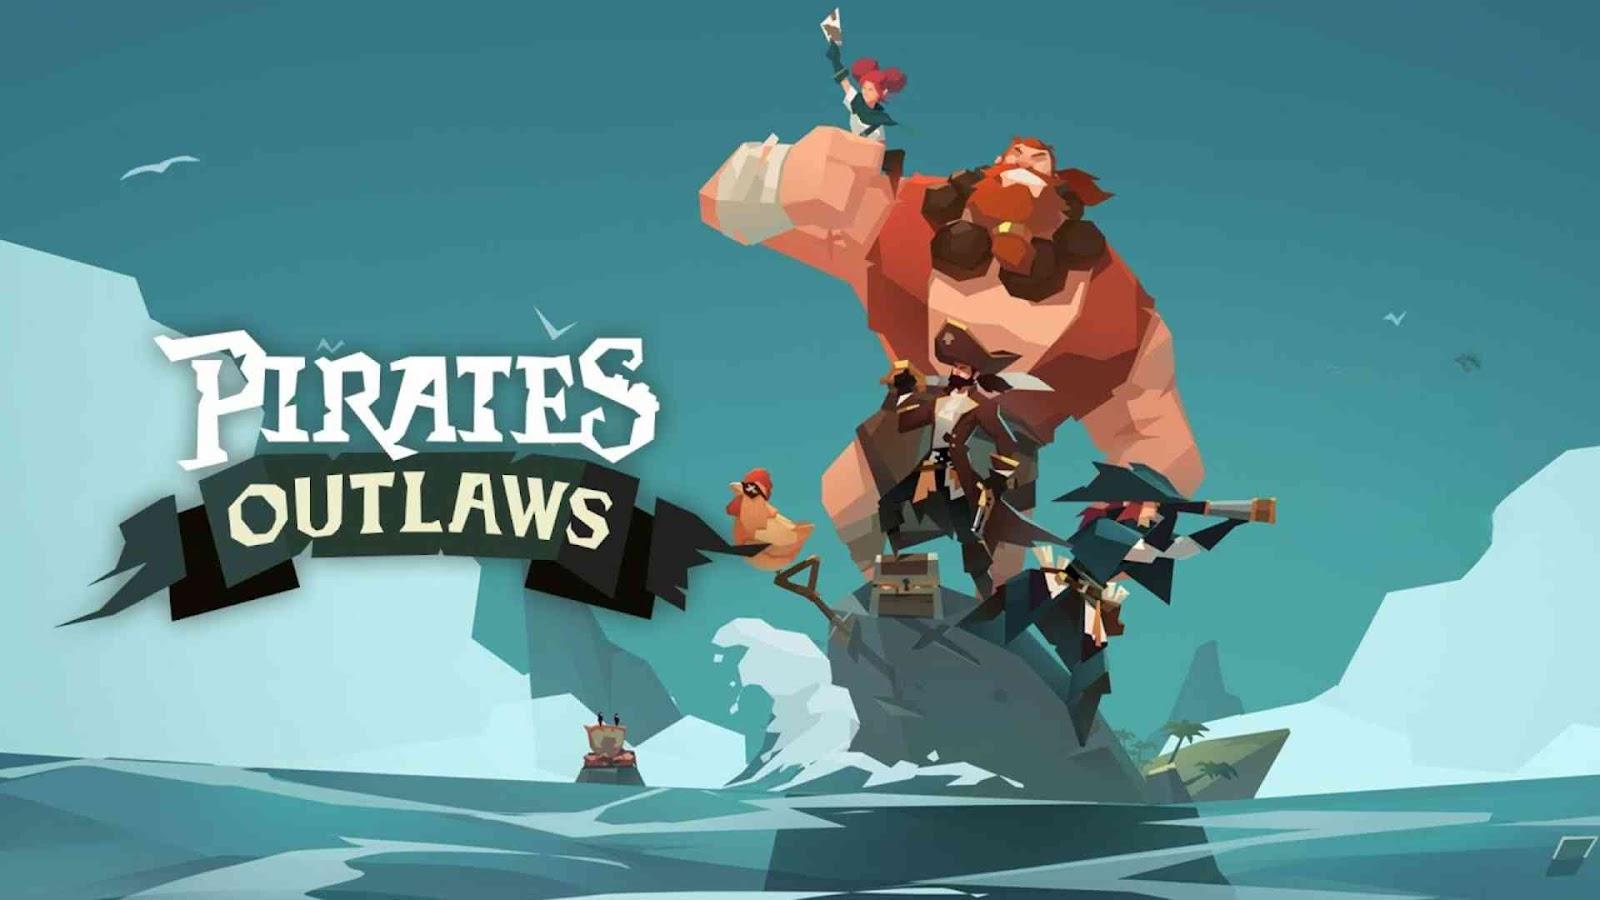 Pirate Outlaws